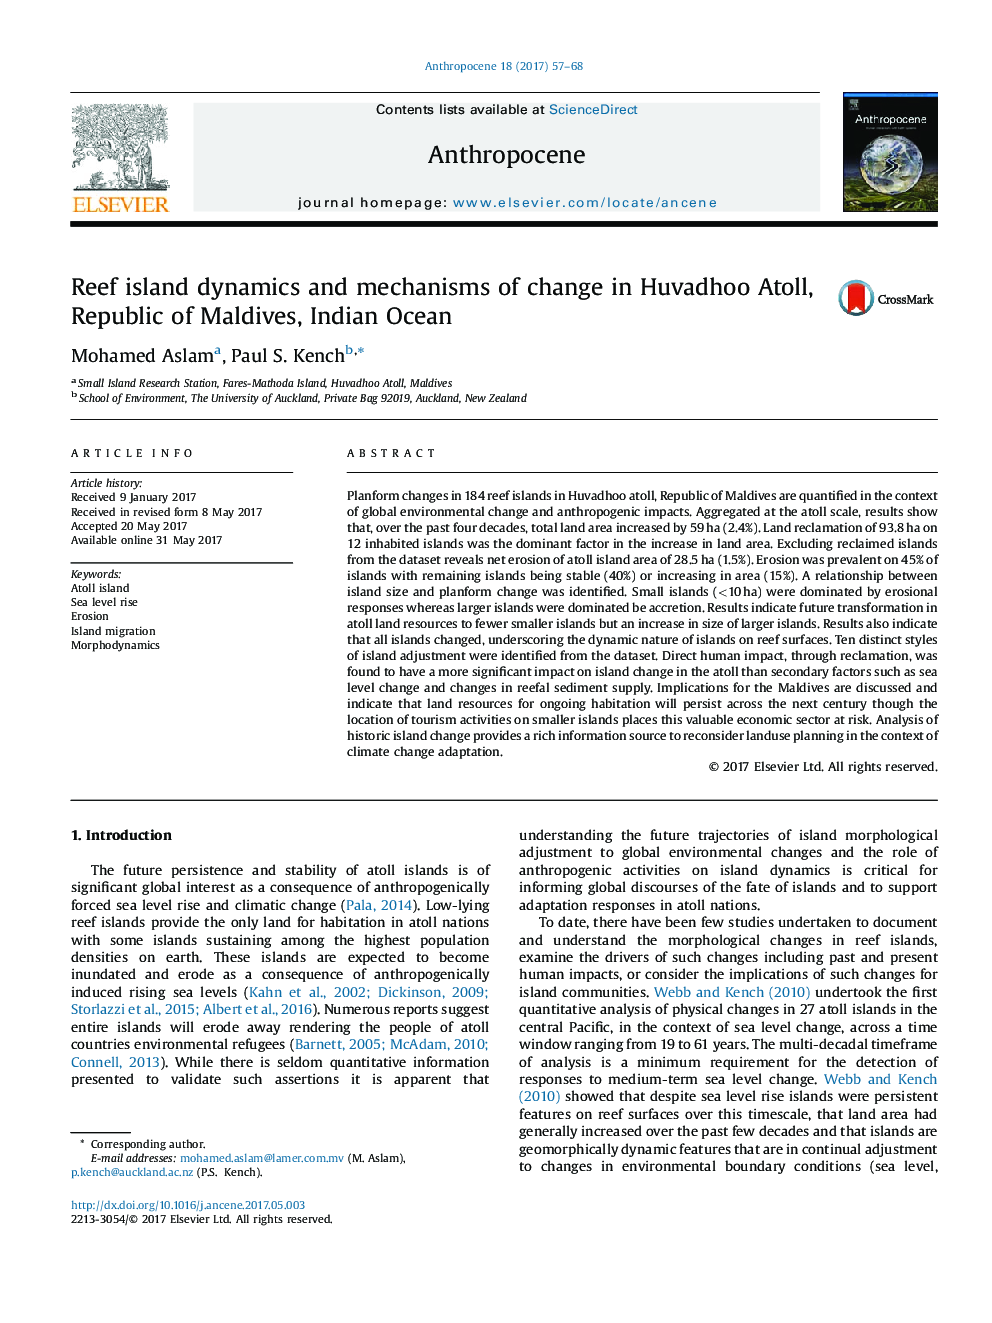 Reef island dynamics and mechanisms of change in Huvadhoo Atoll, Republic of Maldives, Indian Ocean